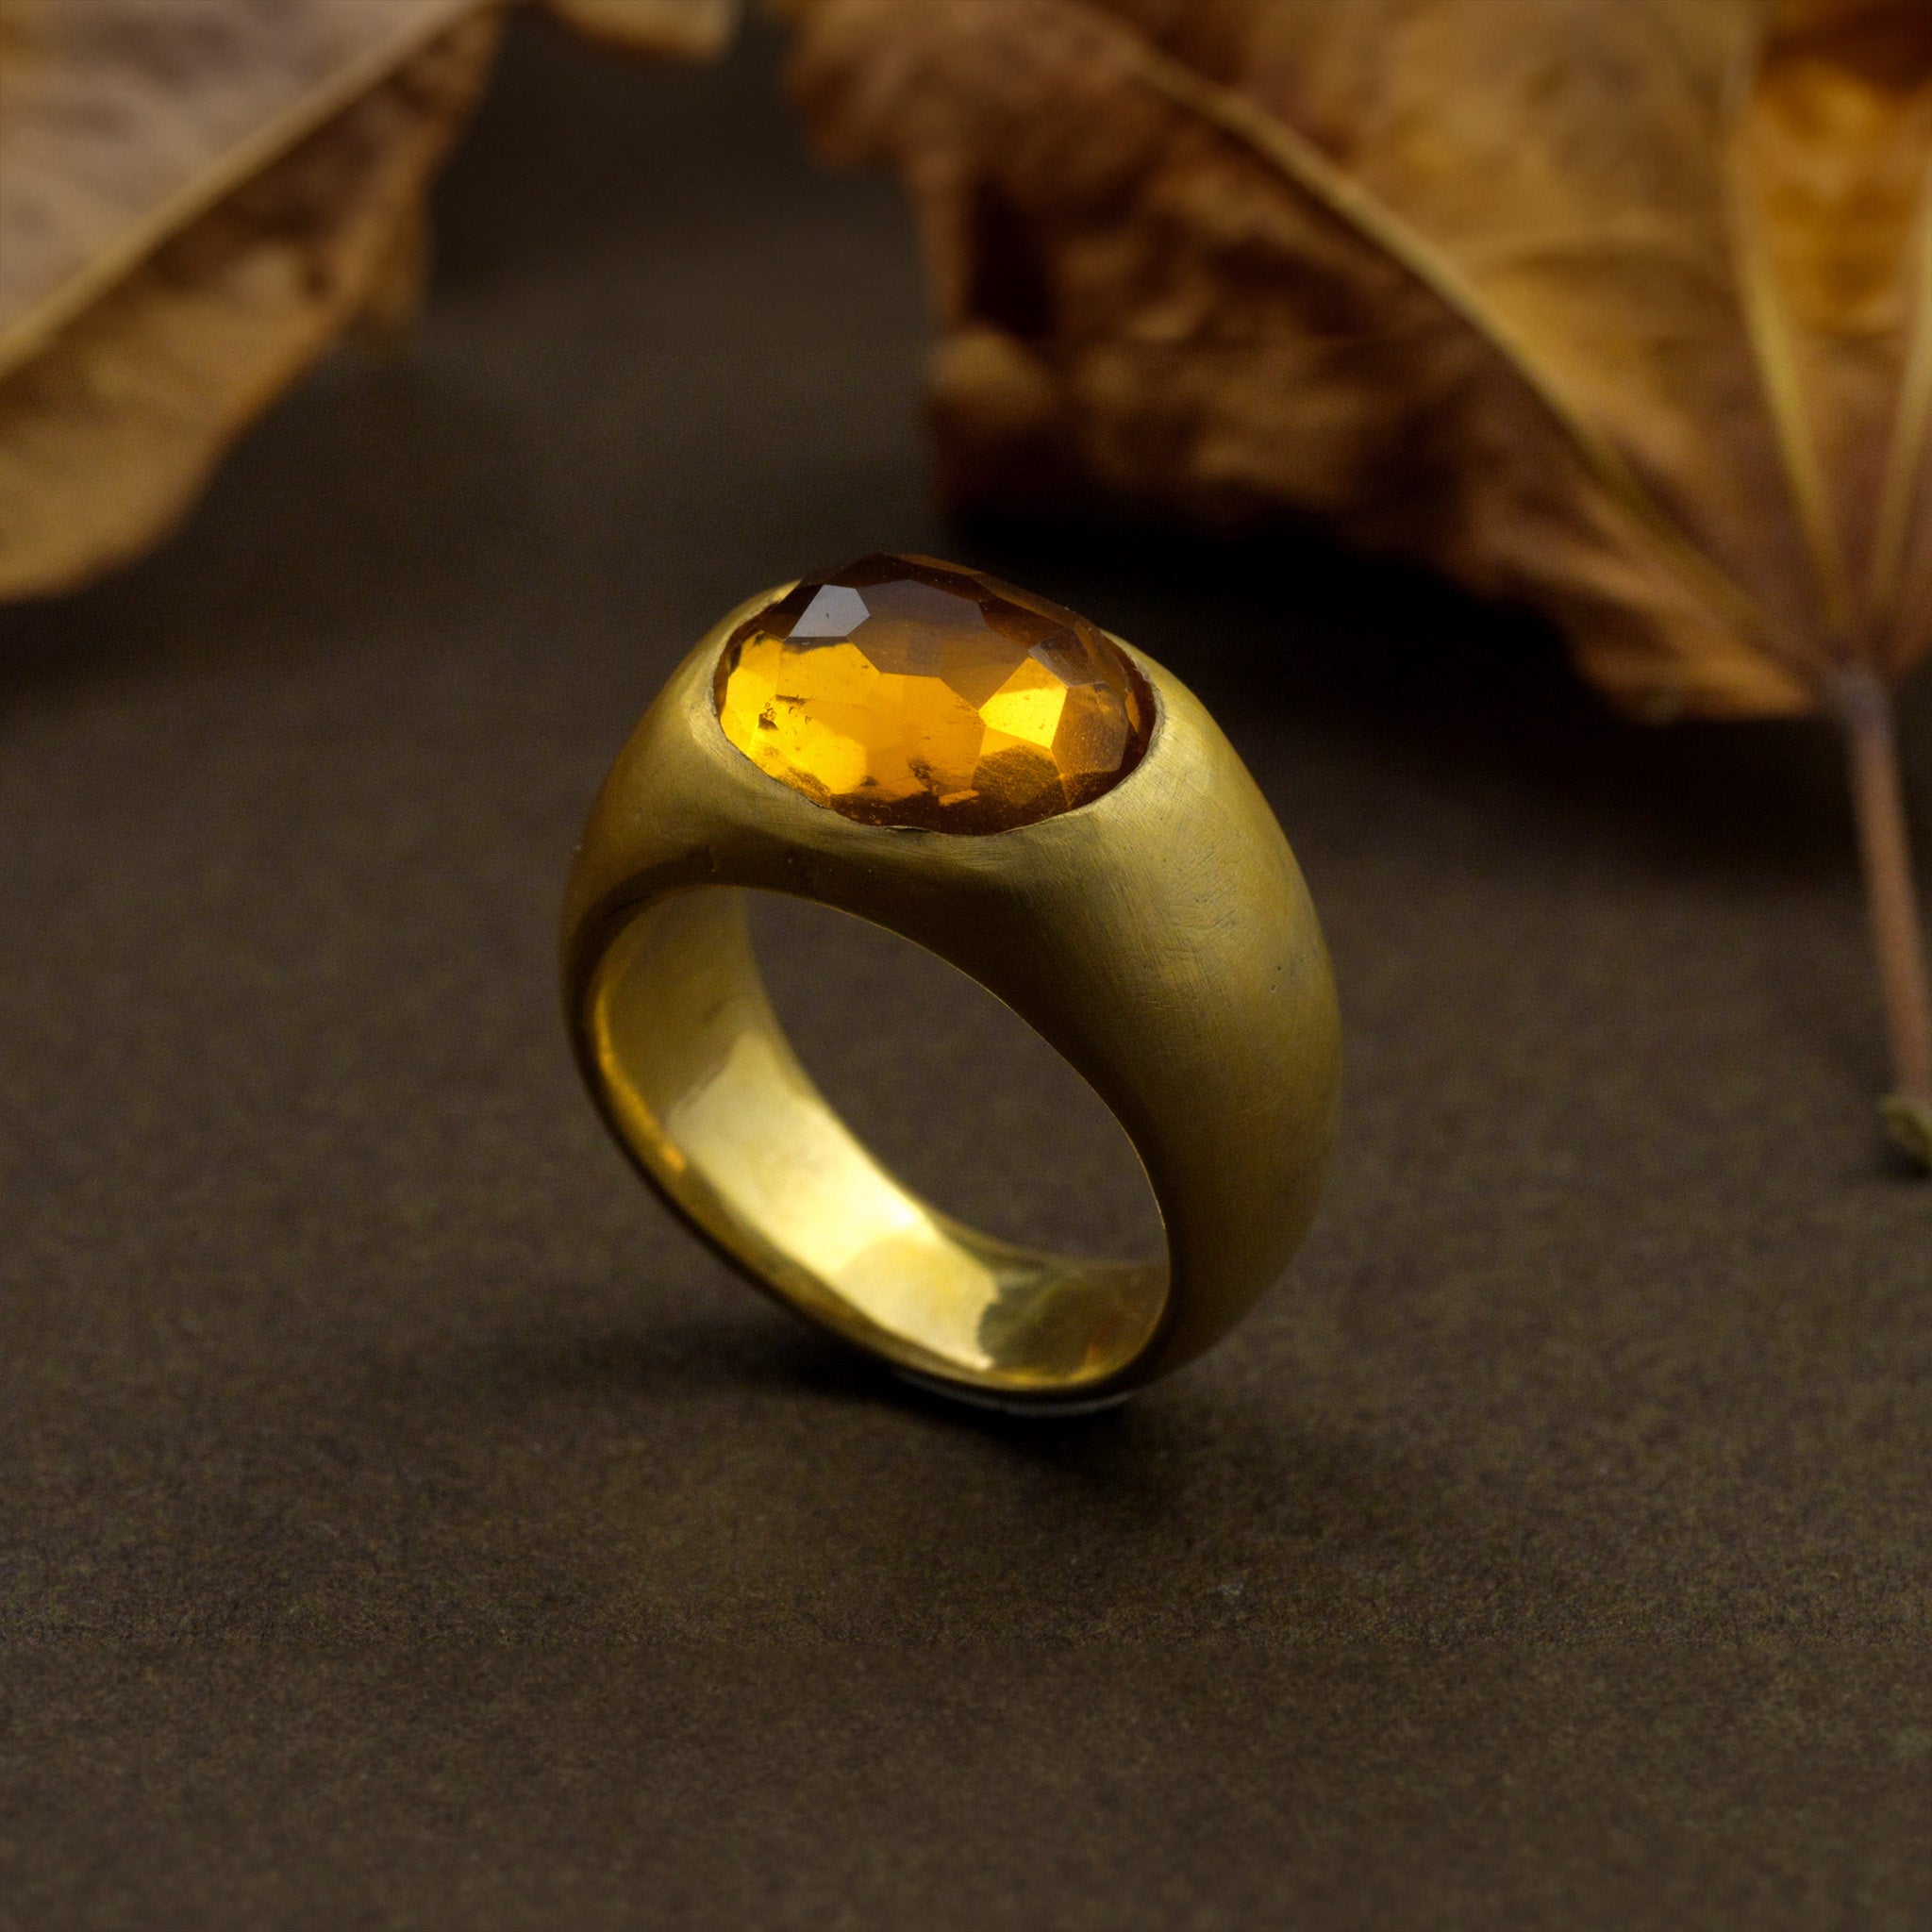 A timeless gold oval ring adorned with a captivating Citrine gemstone on a dark surface with dry leaves in the background. This classic piece exudes traditional elegance and is beloved for its enduring appeal.